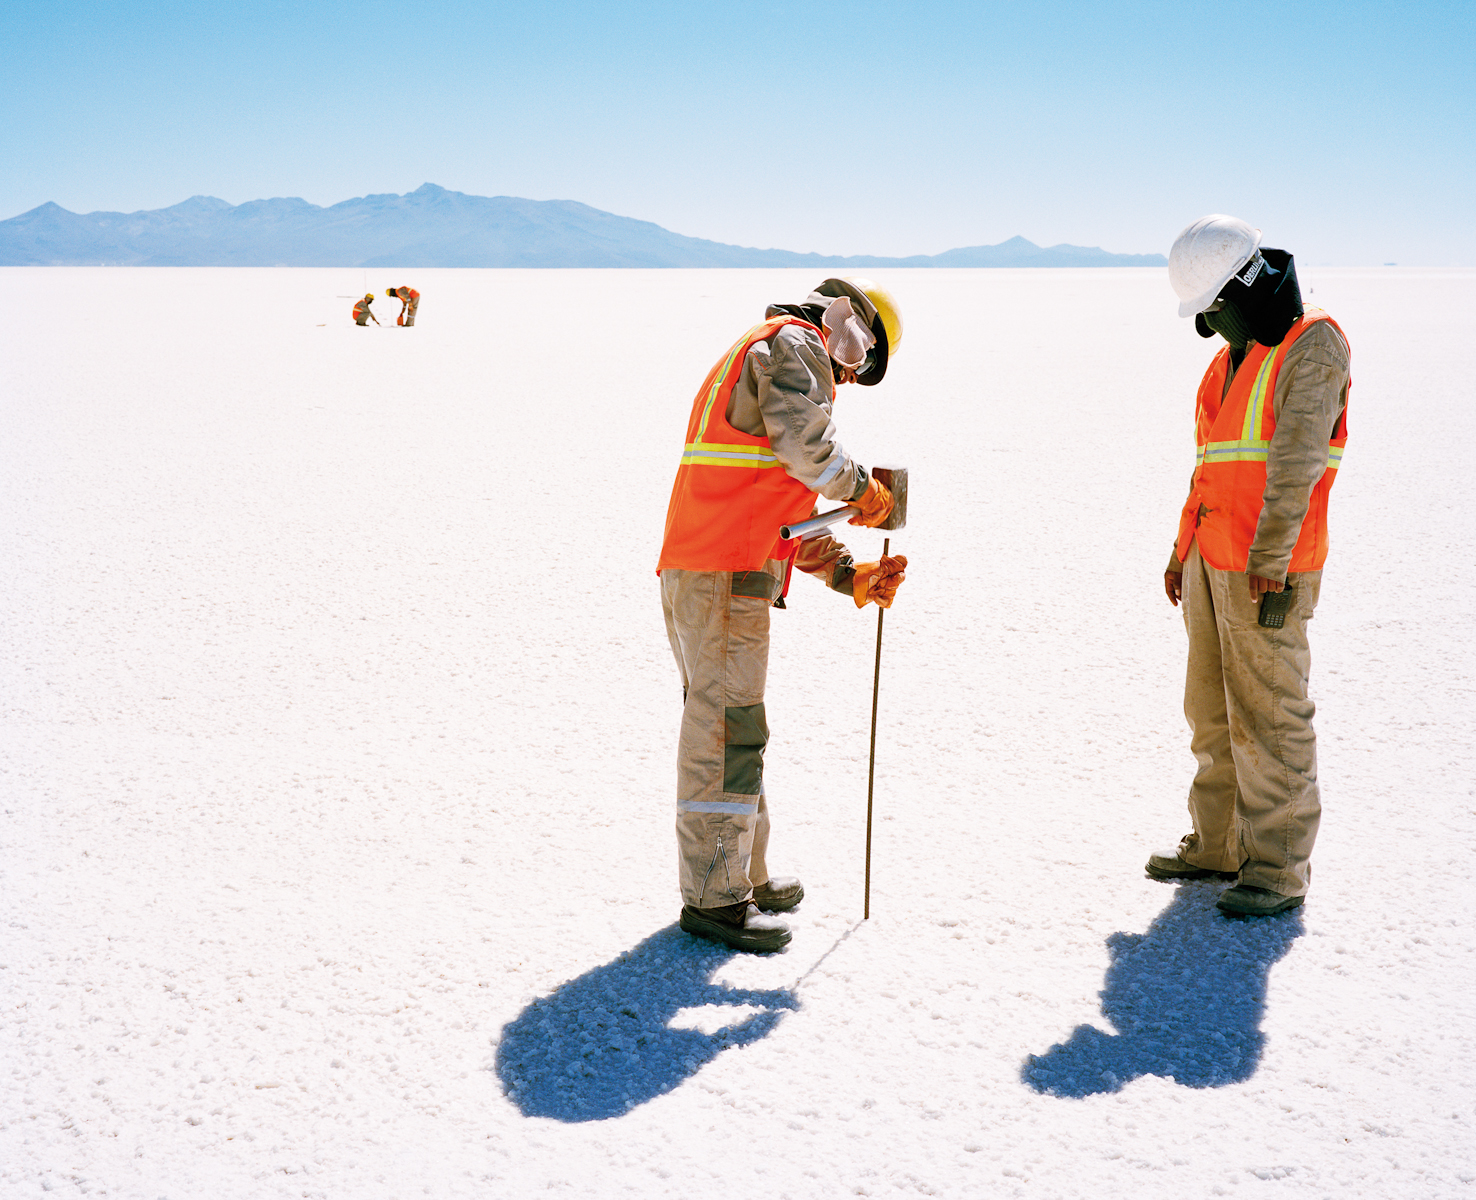   Workers at lithium construction site in the Salar de Uyuni, Bolivia  